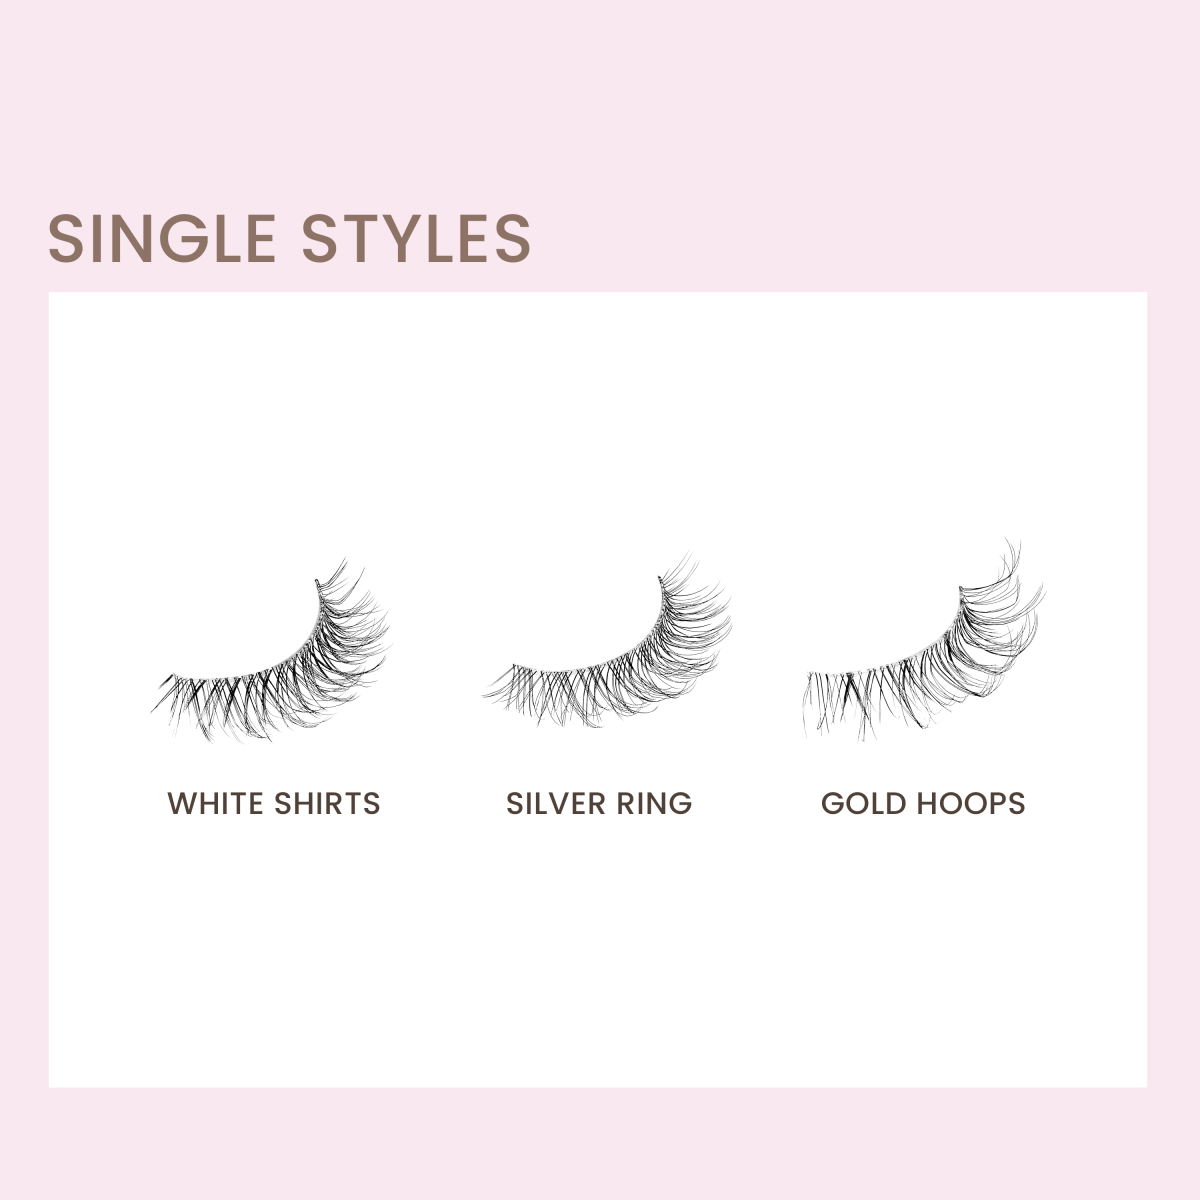 3 styles of false eyelash single strips are depicted: White Shirts, Silver Ring, and Gold Hoops